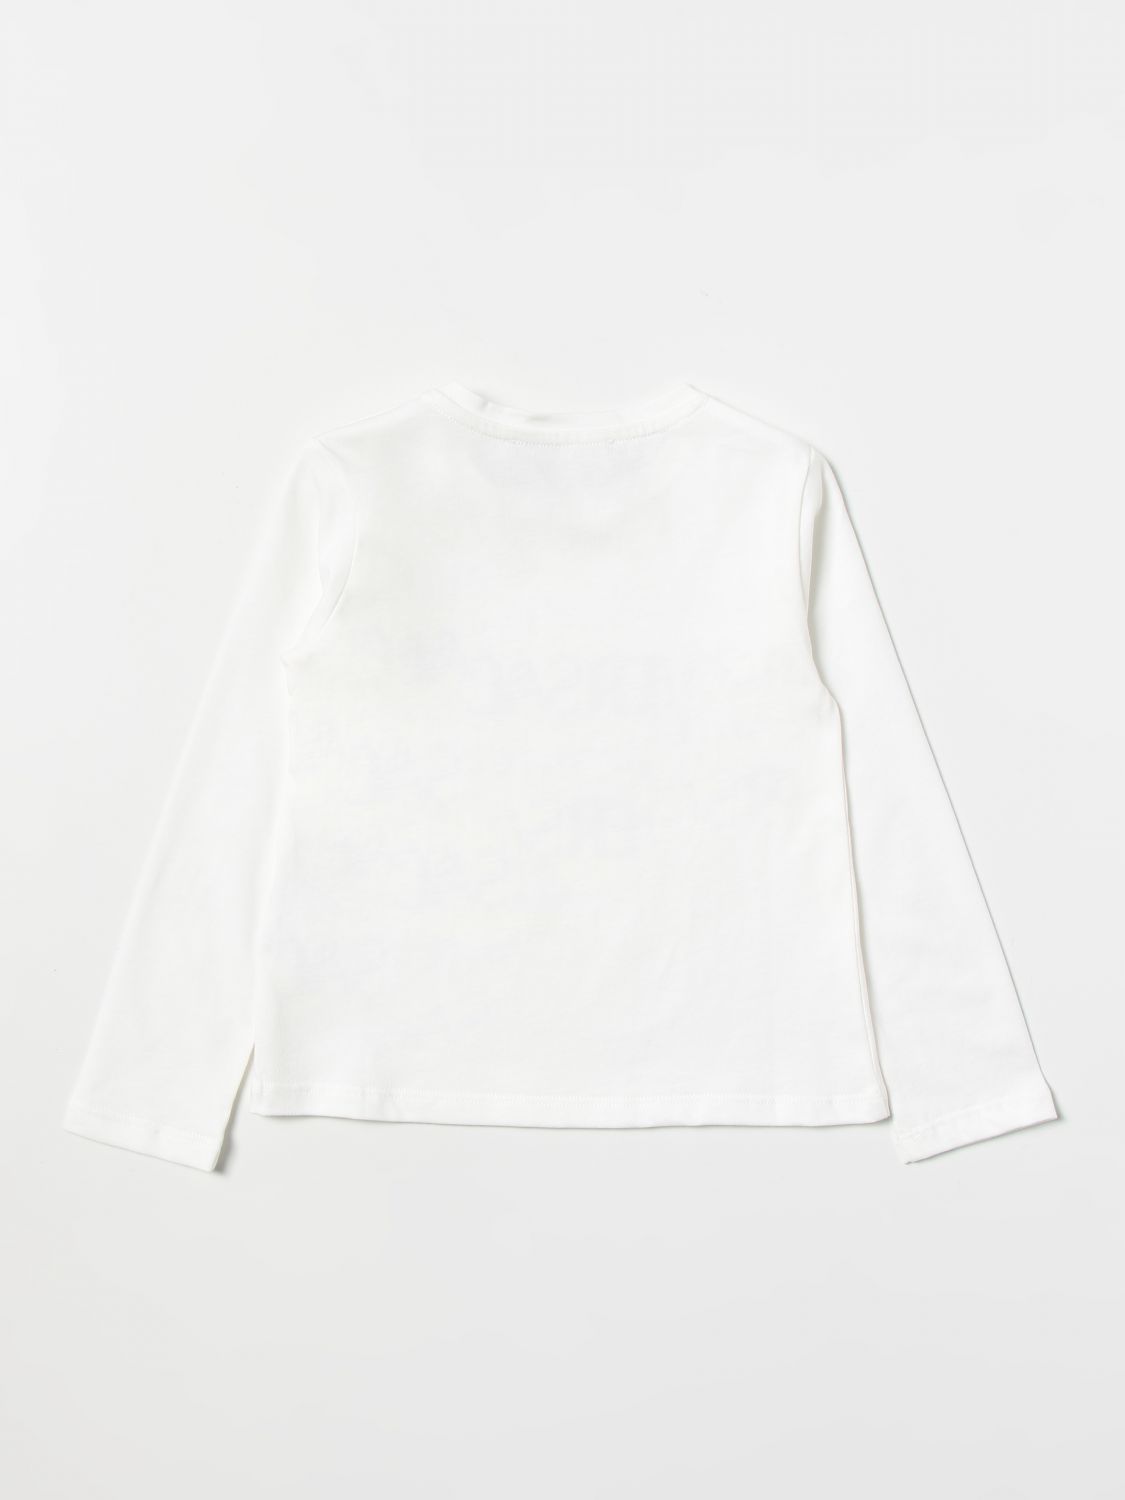 YOUNG VERSACE: t-shirt for baby - White | Young Versace t-shirt ...